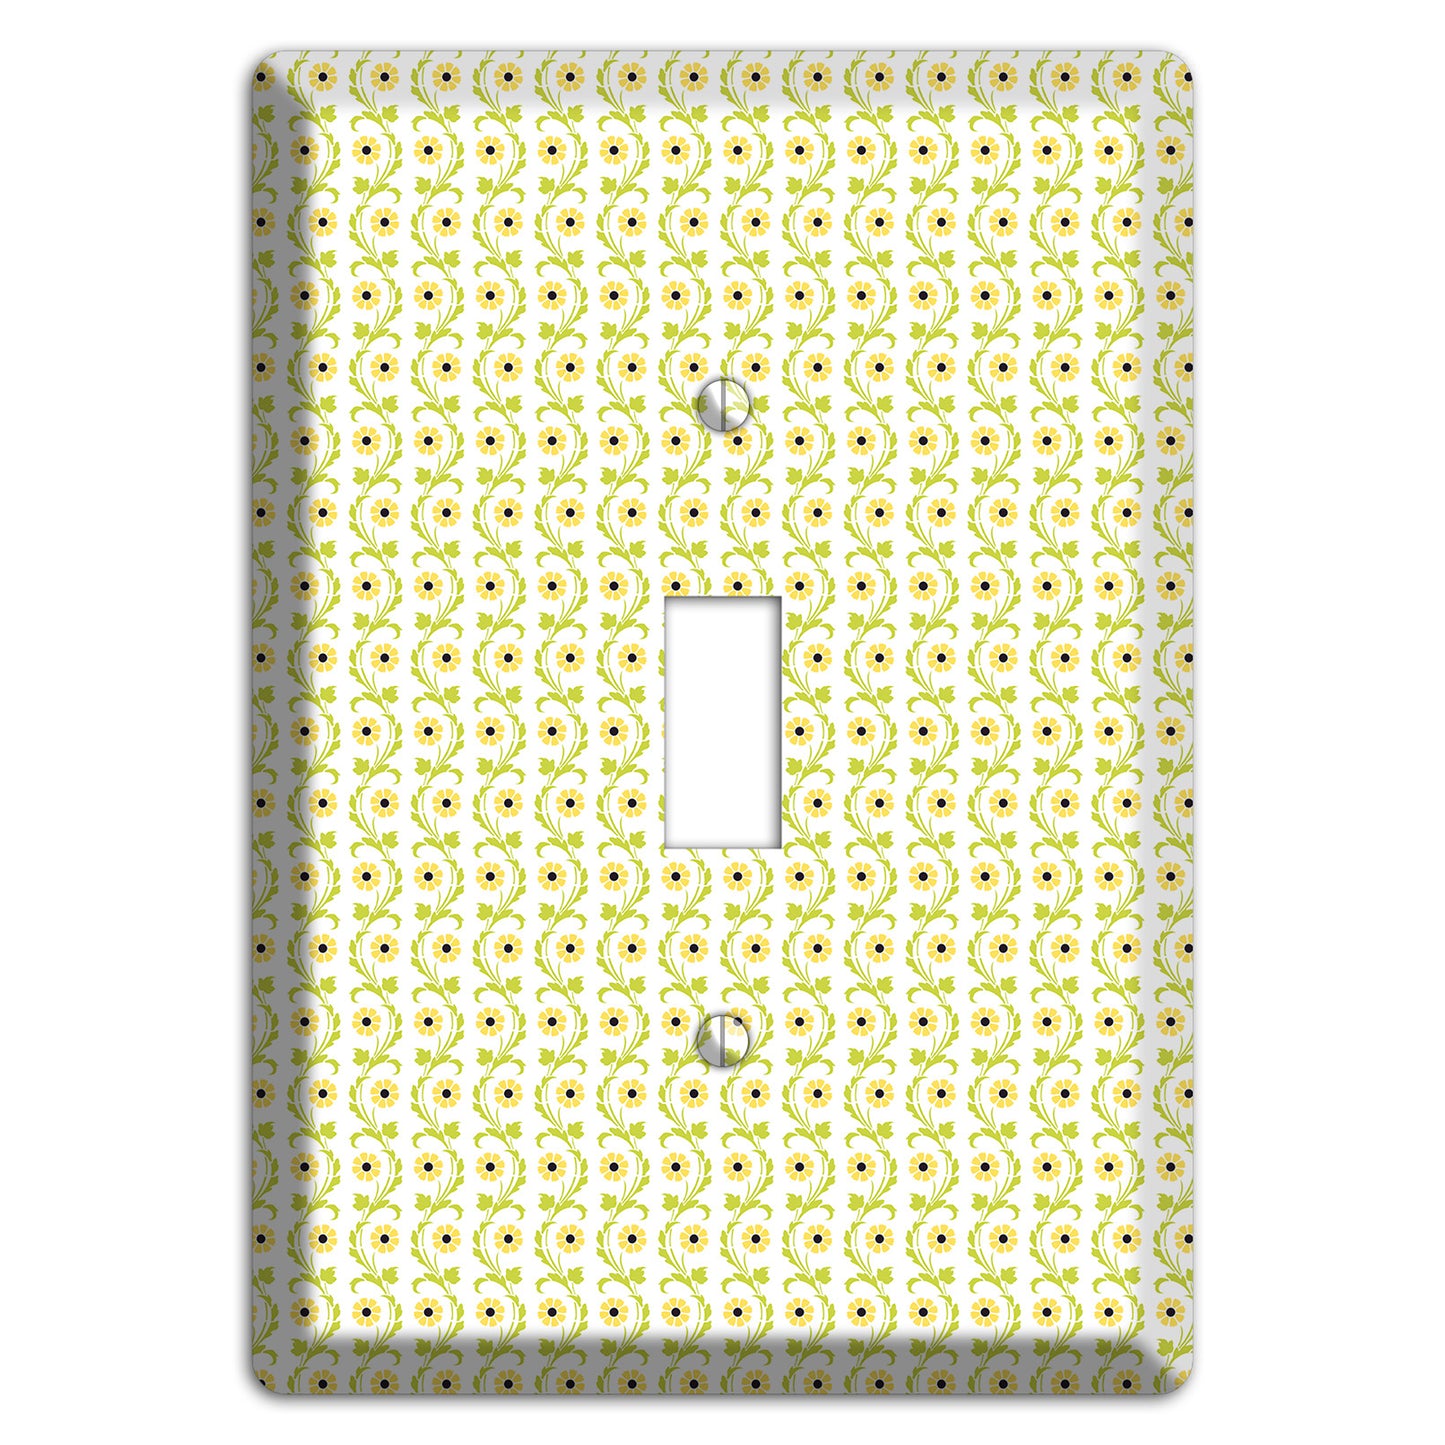 Tiny Yellow and Green Retro Sprig Cover Plates